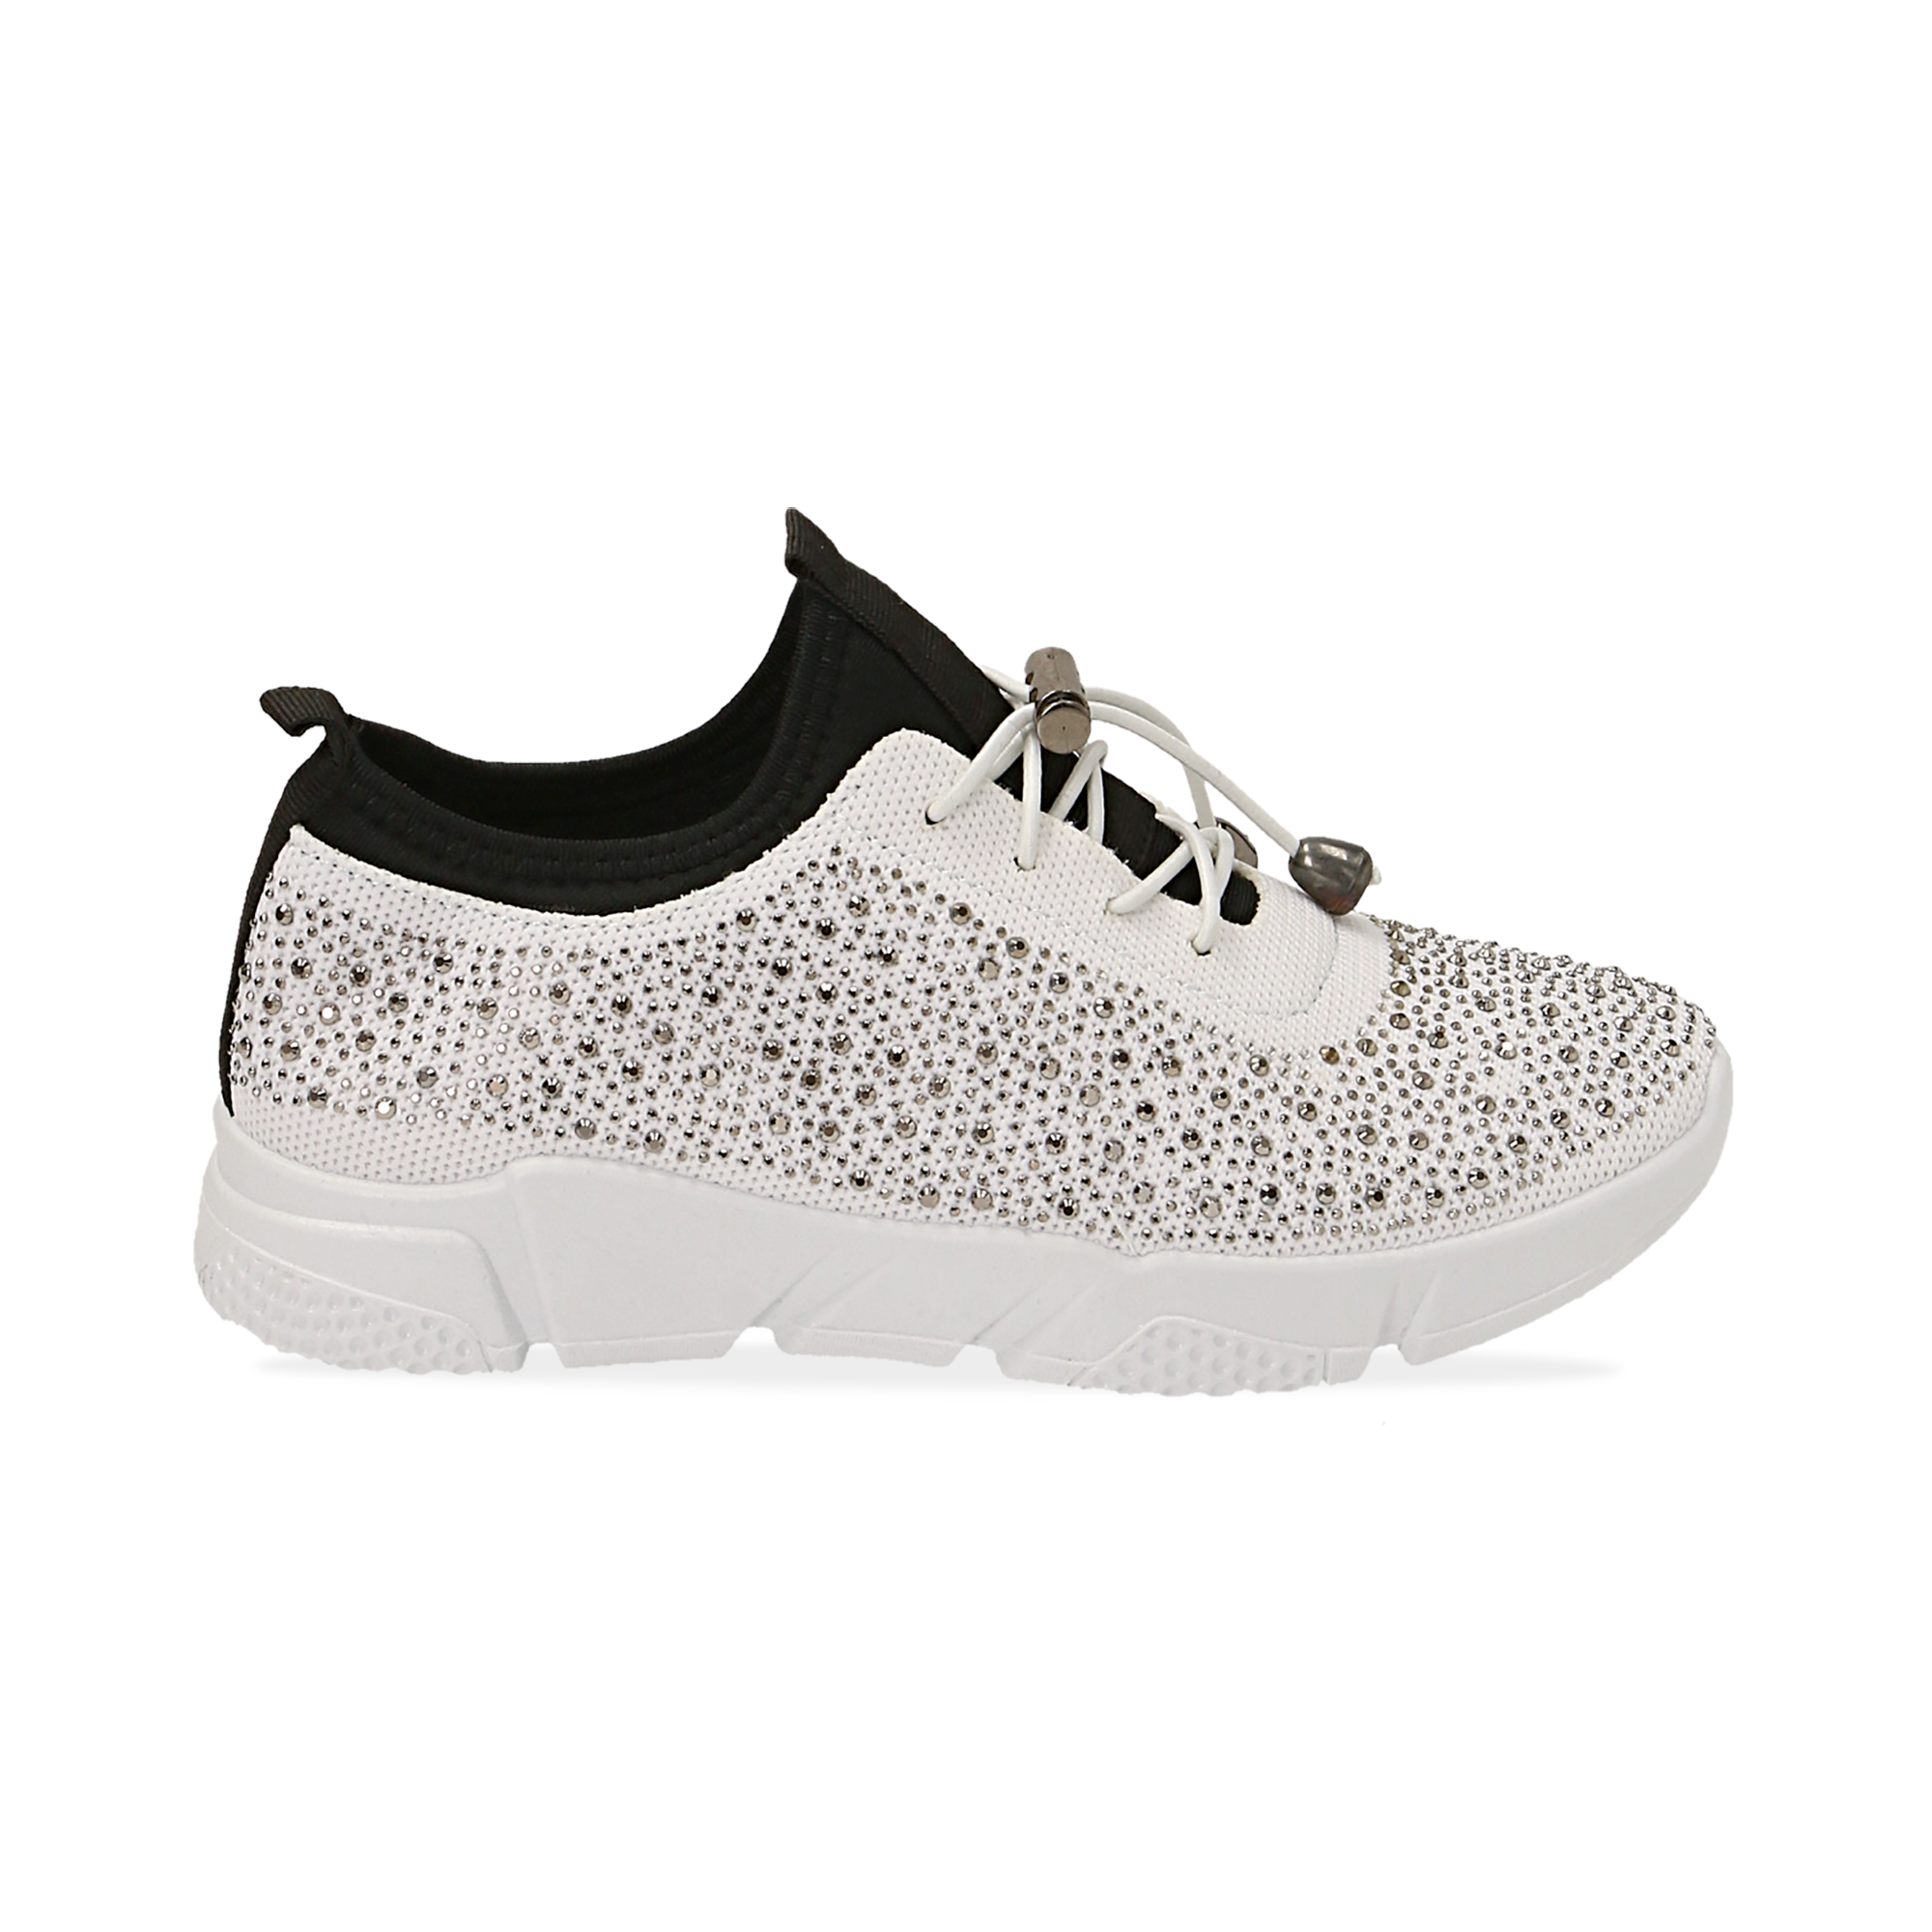 sneakers bianche con strass